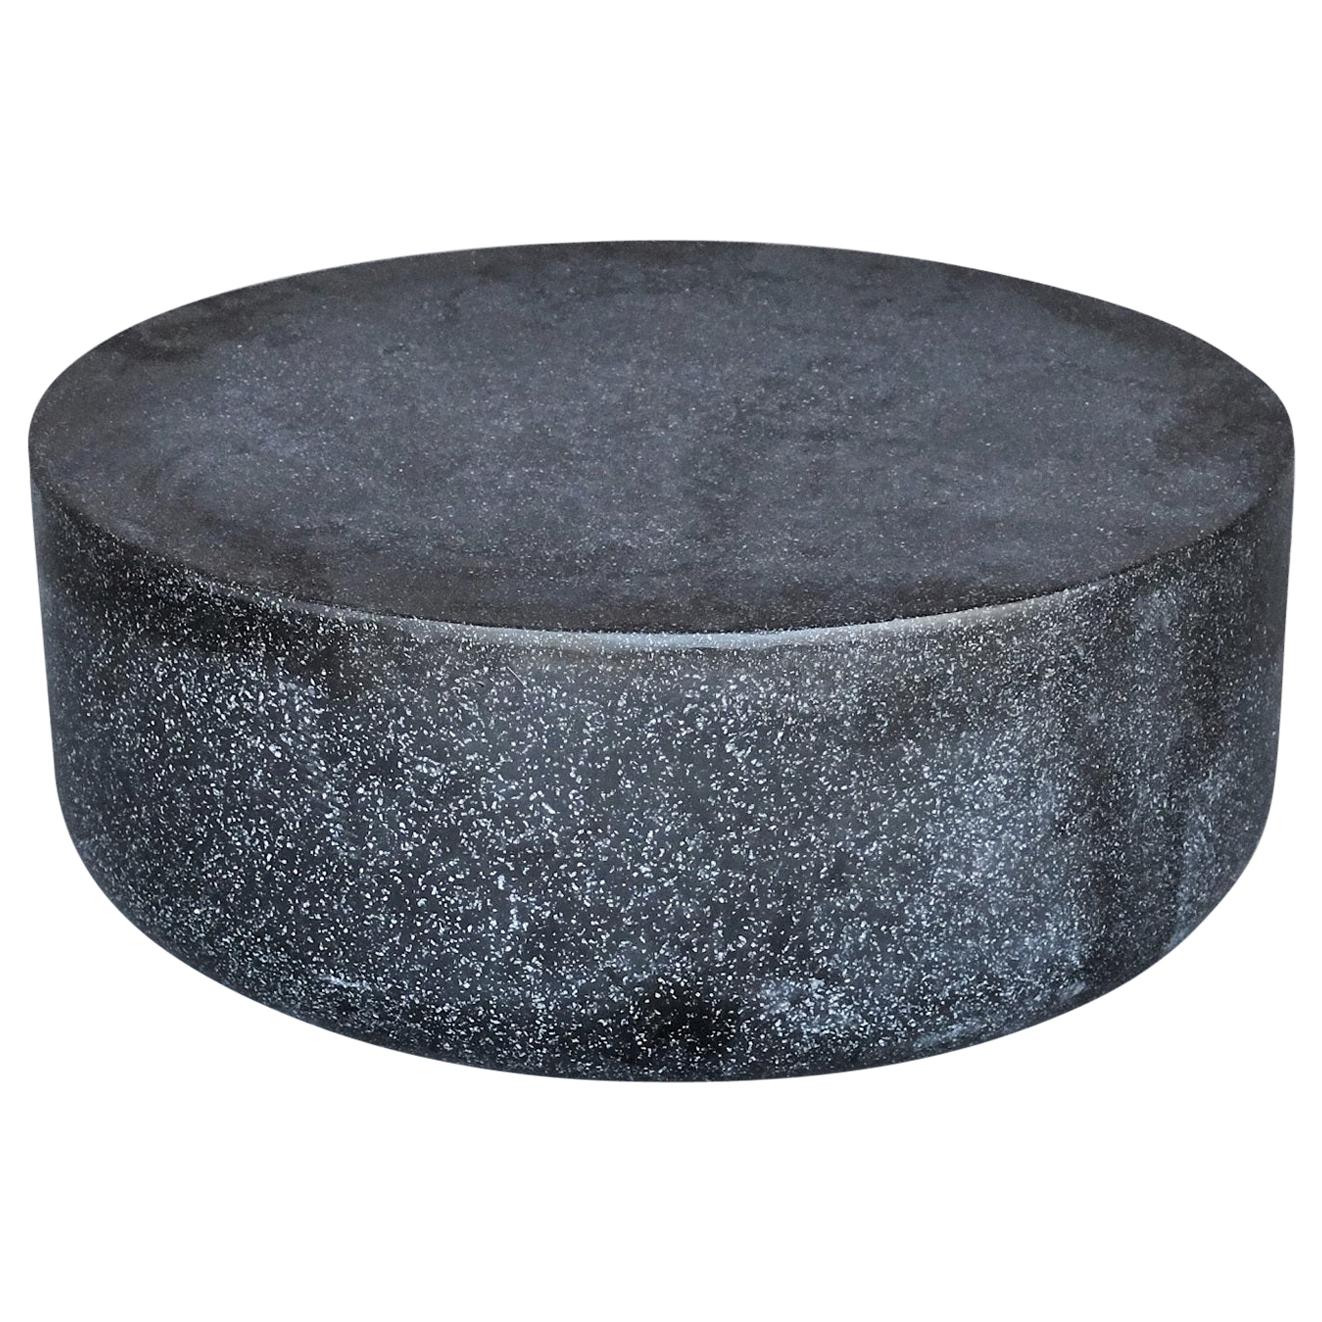 Cast Resin 'Millstone' Coffee Table, Coal Stone Finish by Zachary A. Design